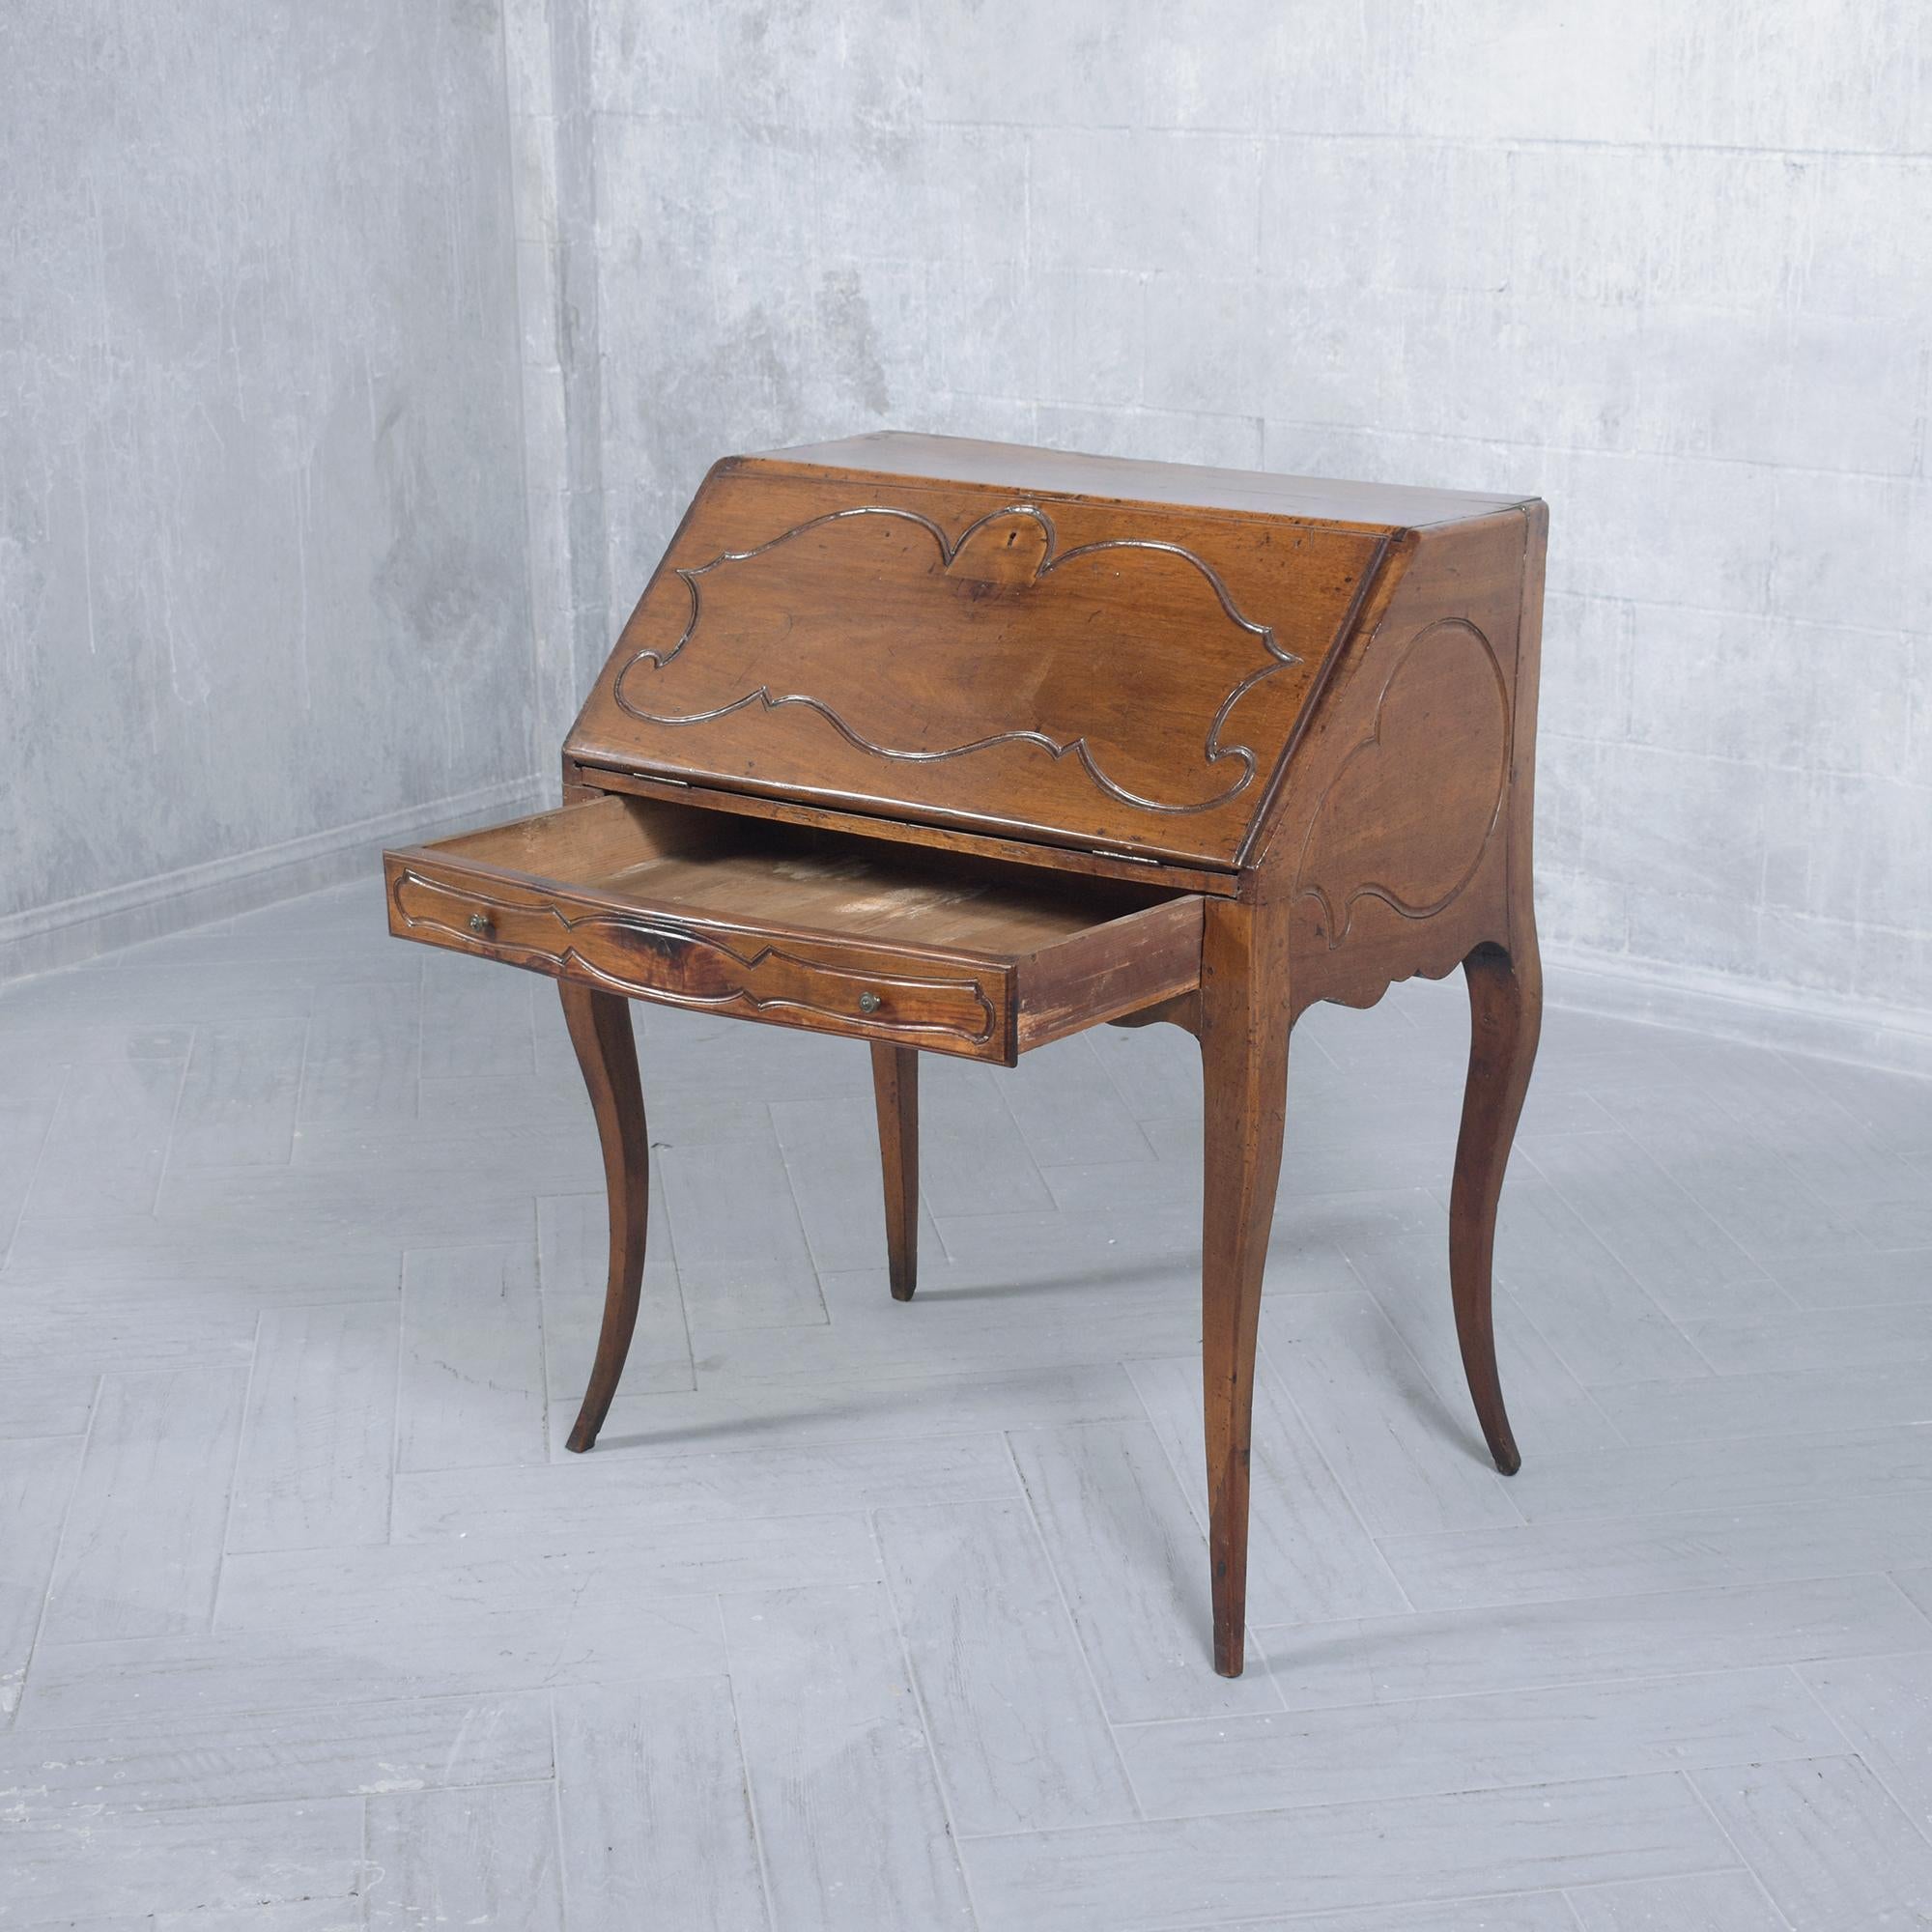 Restored Late 18th-Century French Antique Secrétaire with Intricate Carvings In Good Condition For Sale In Los Angeles, CA